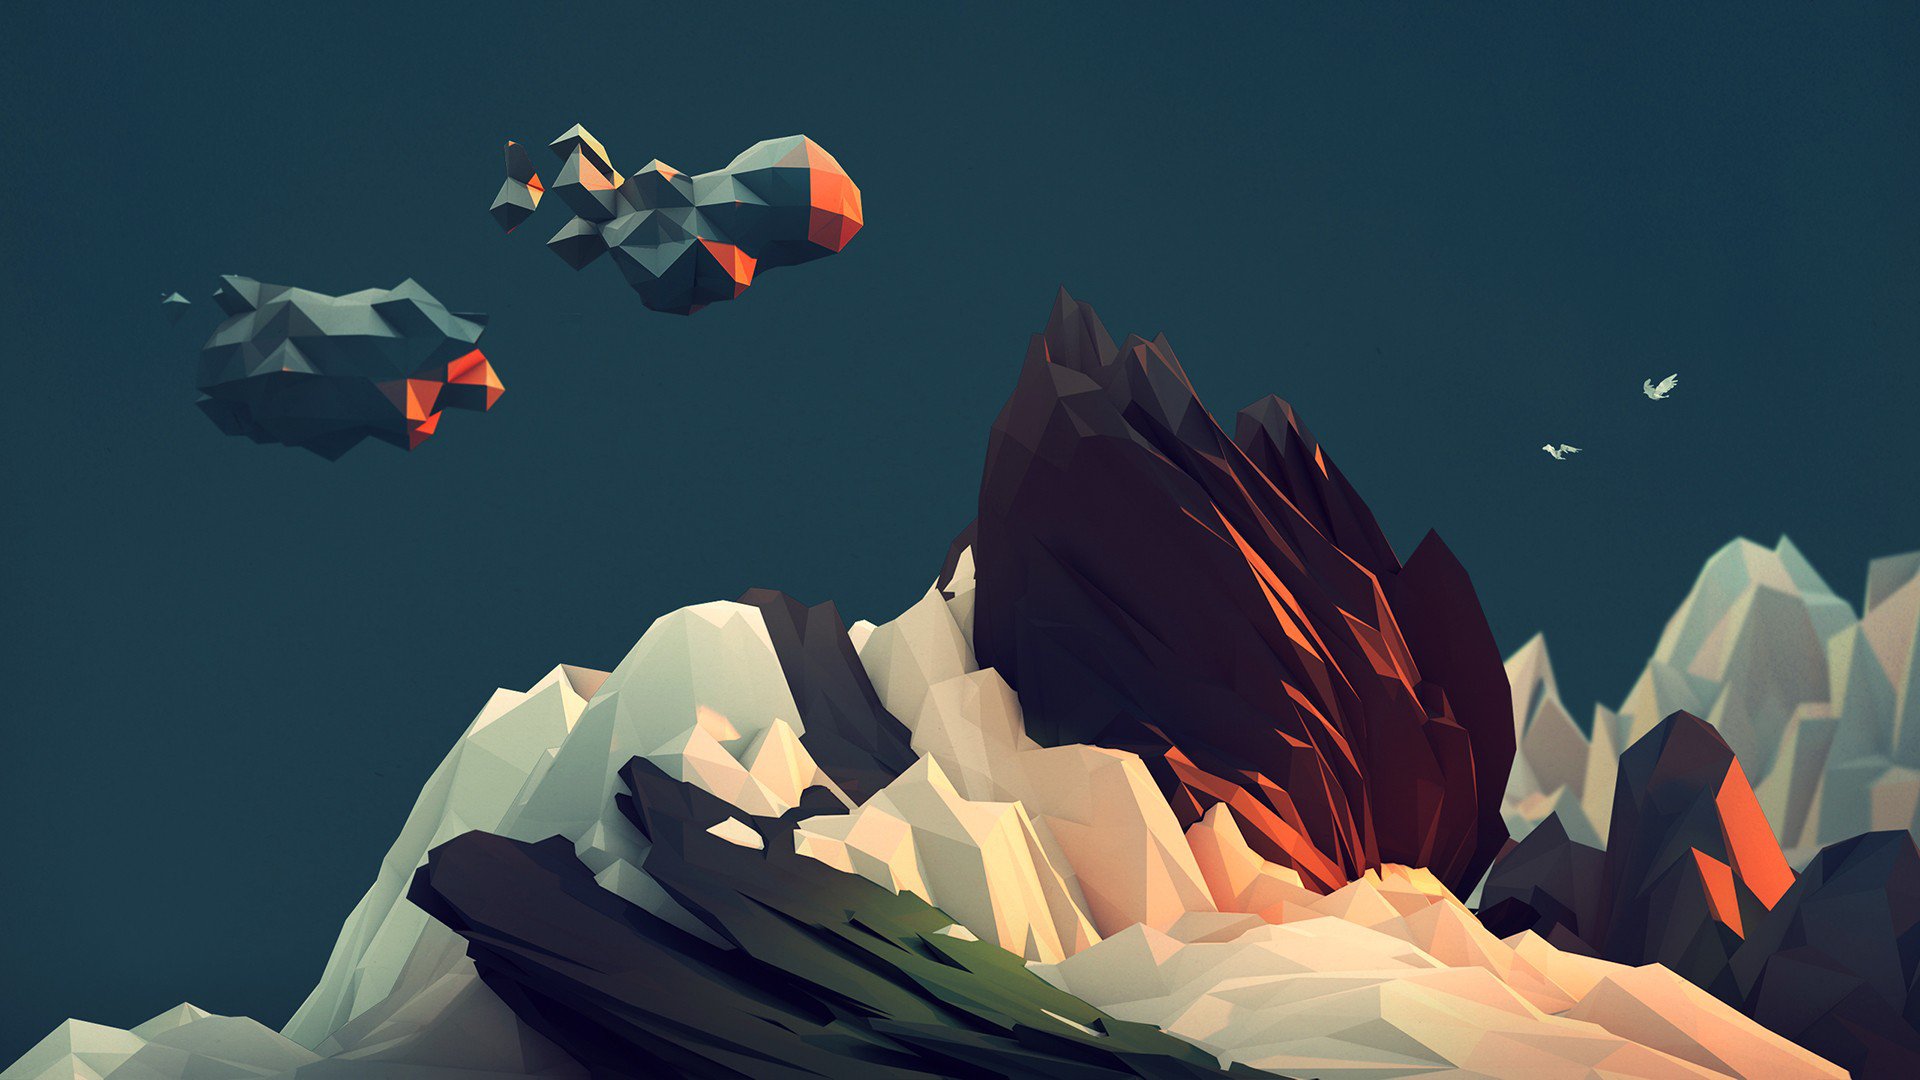 Multiply Polygon Art Wallpapers.